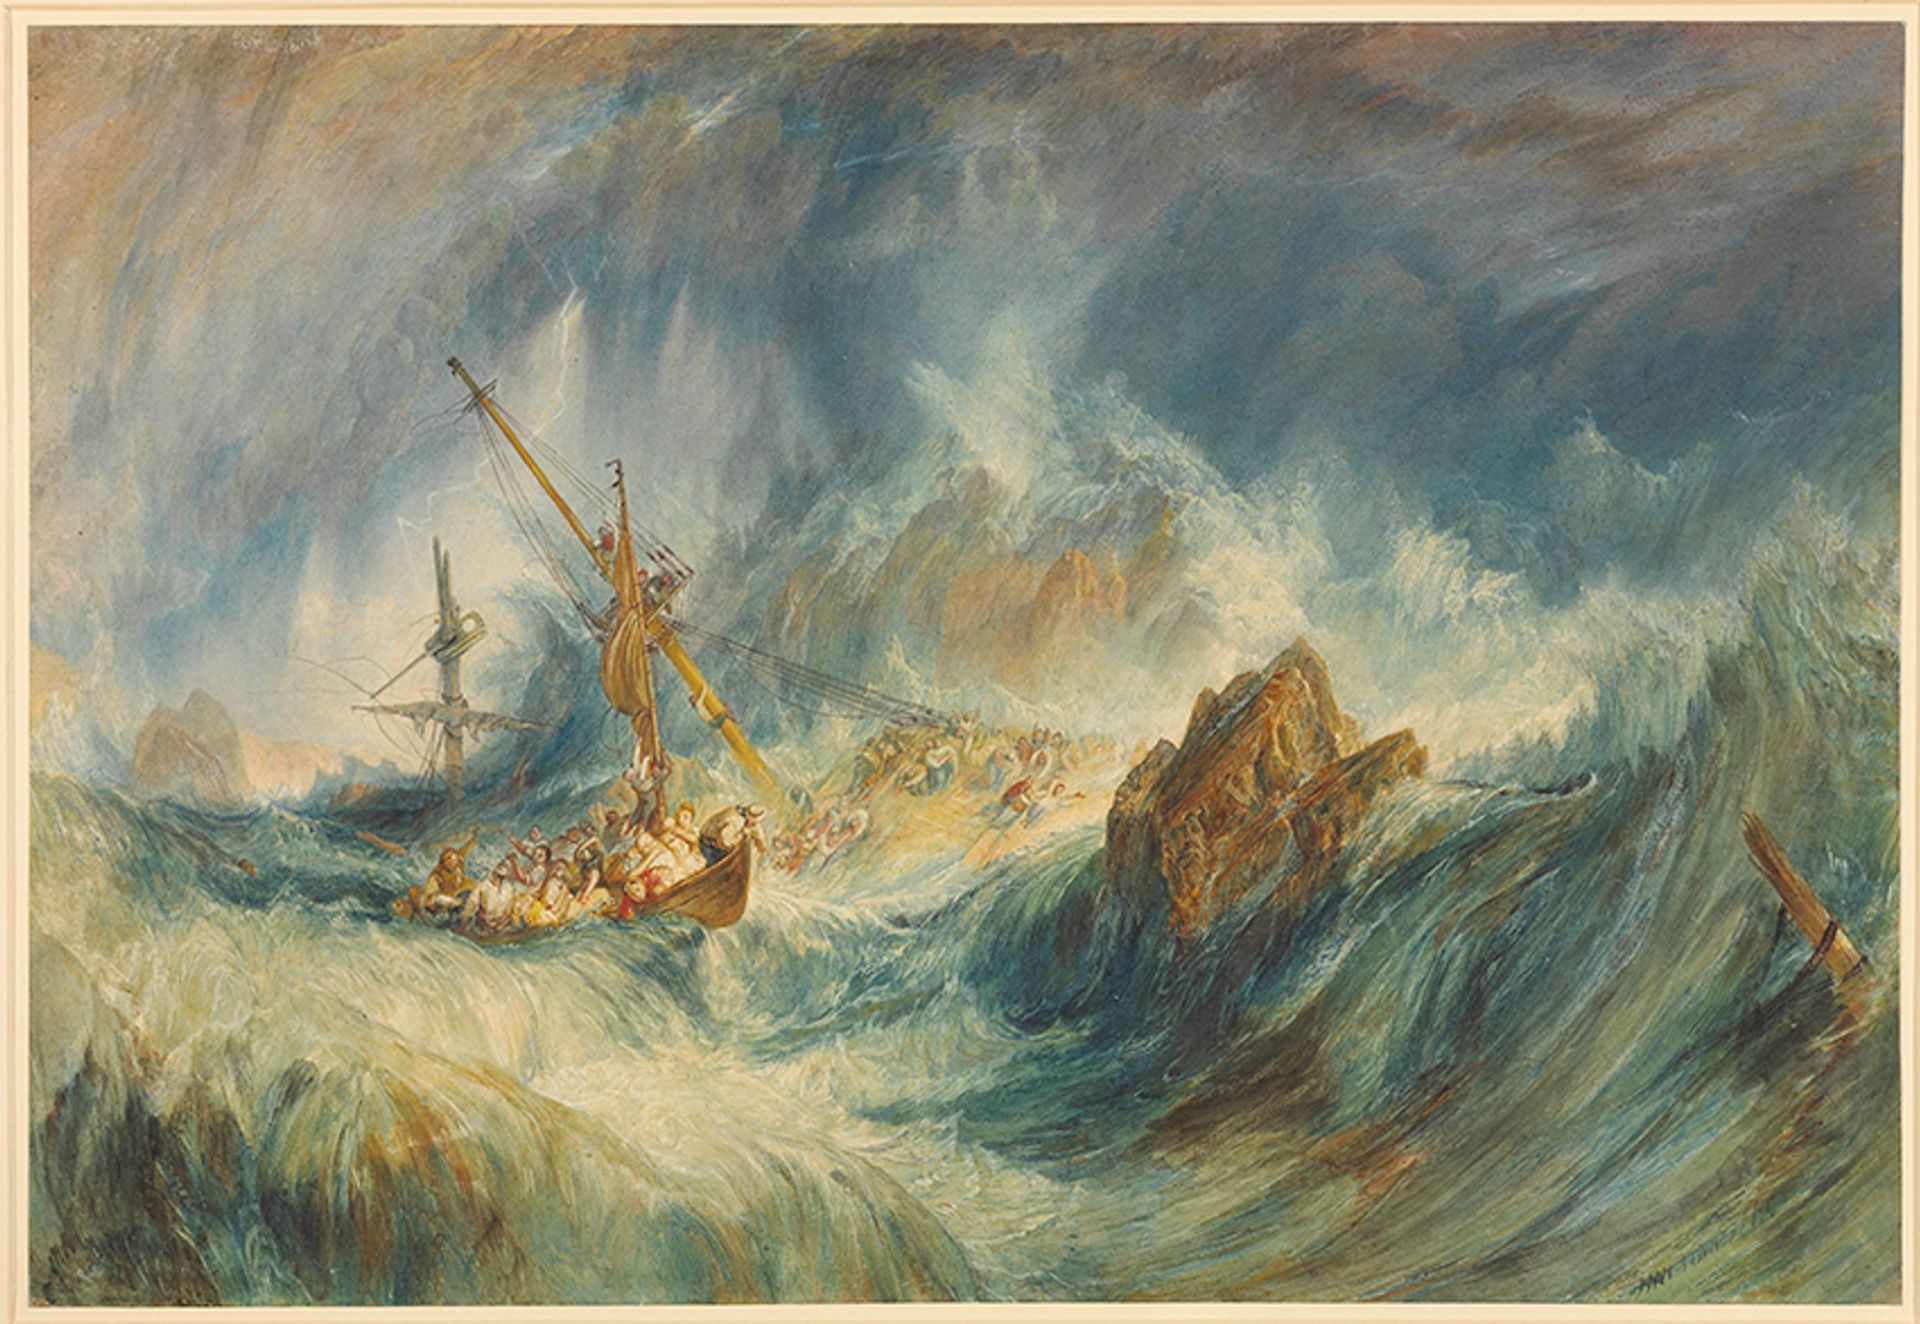 Joseph Mallord William Turner, A Storm (Shipwreck, 1823) © 2022, The Trustees of the British Museum